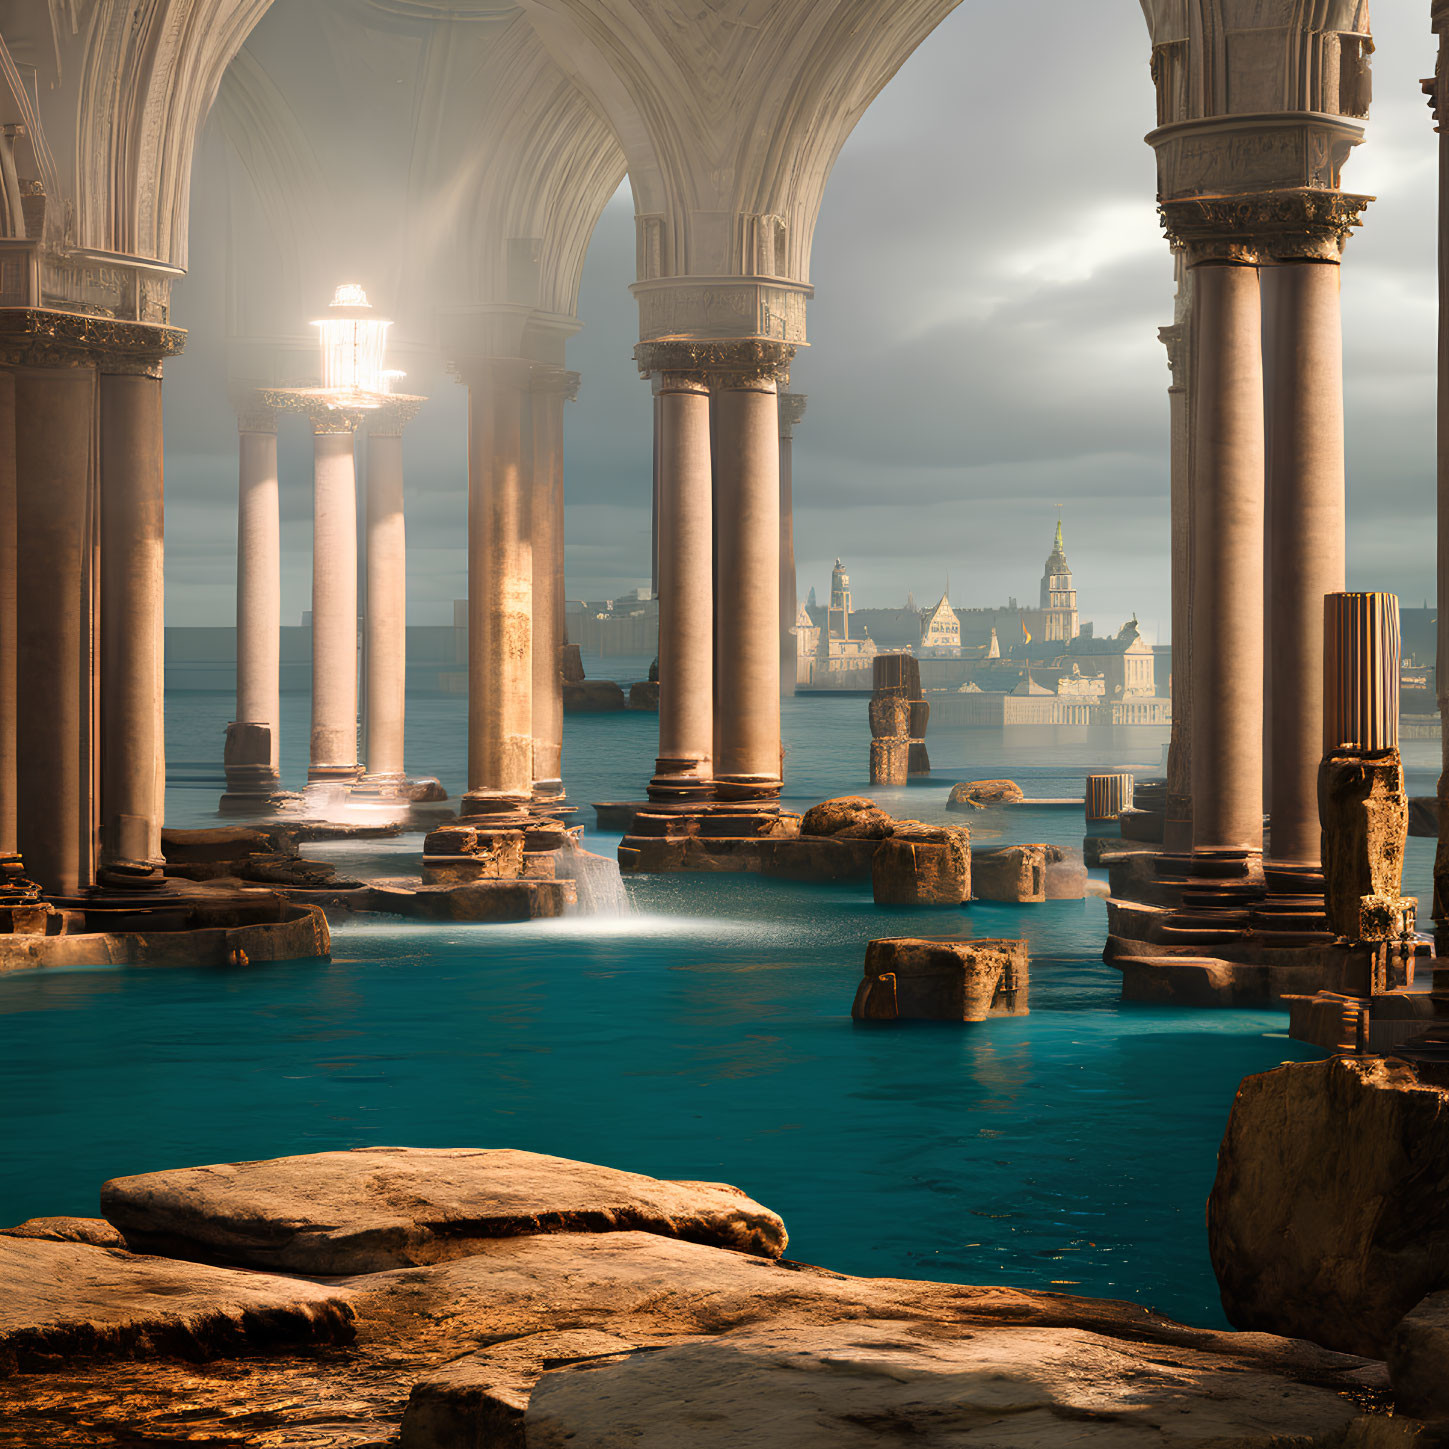 Classical columns frame serene water under sunlight with distant cityscape, creating historical tranquility.